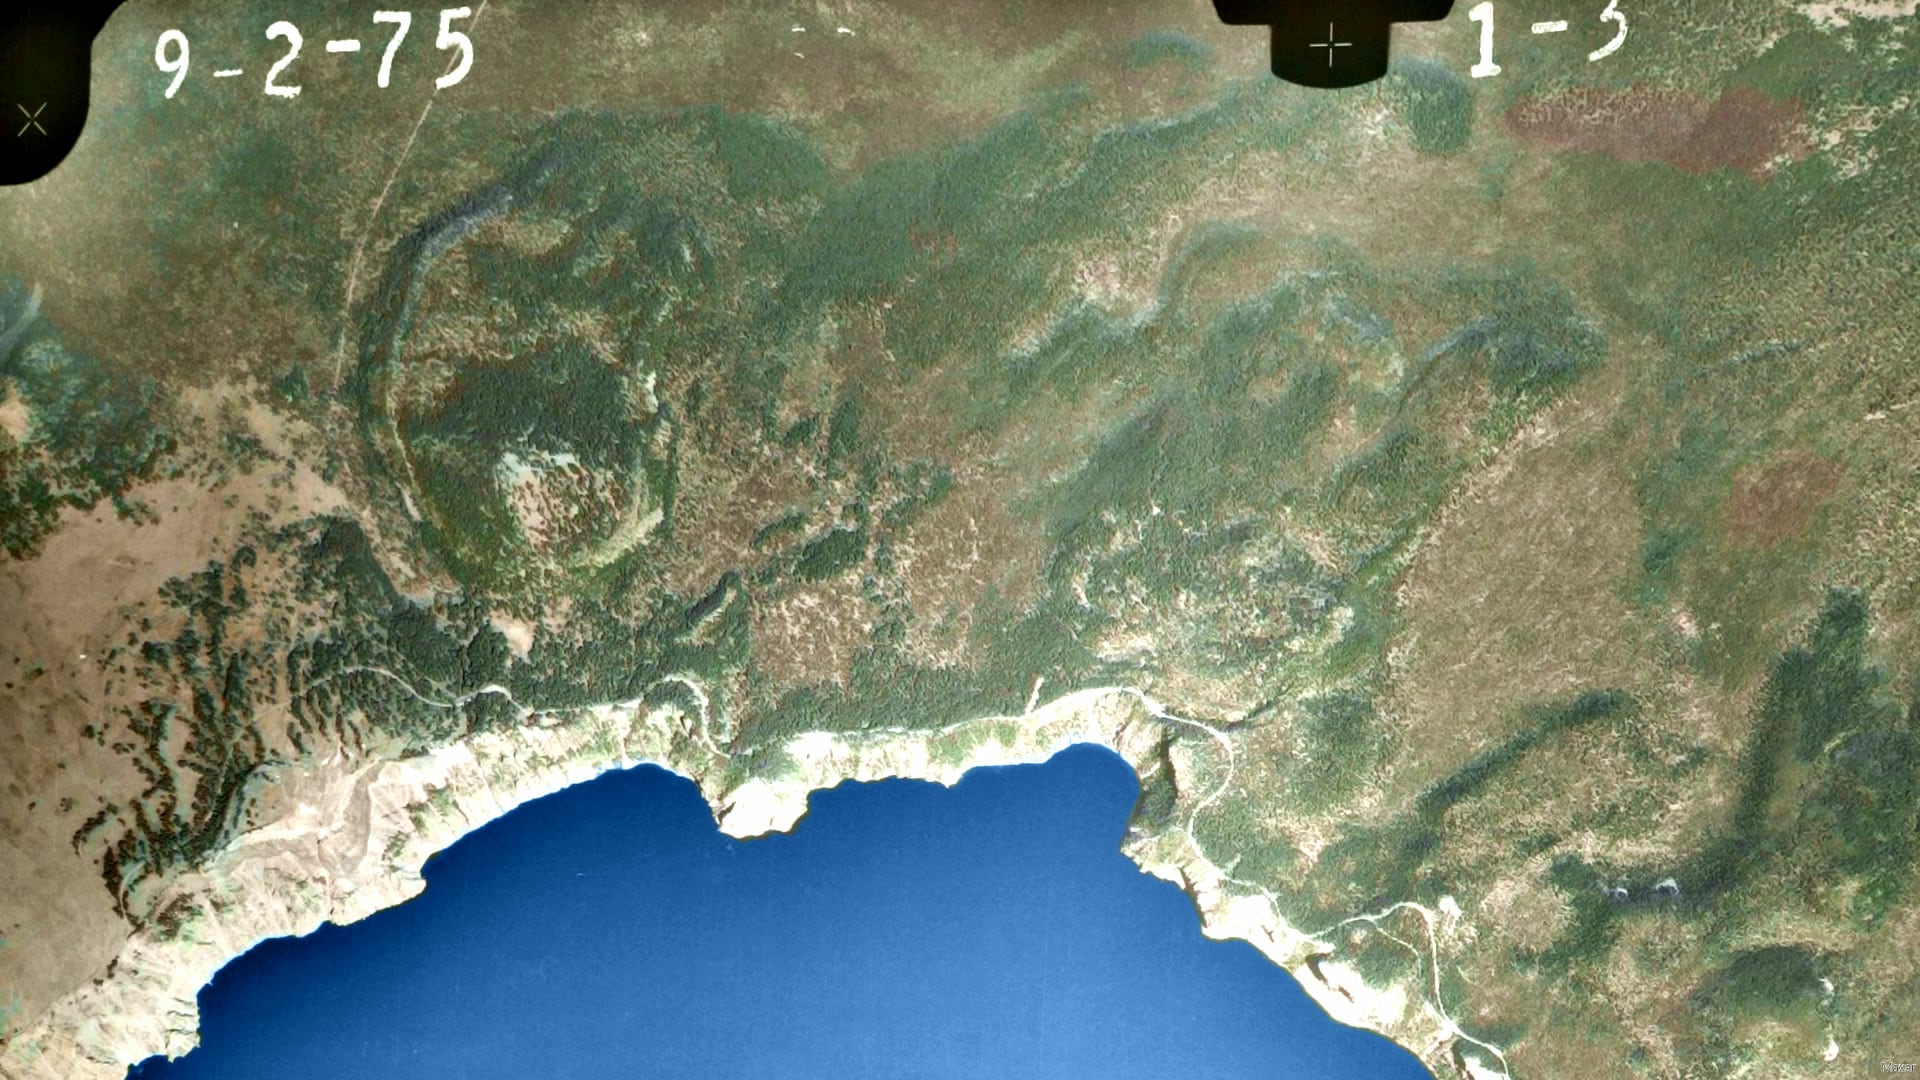 Colorized USGS airphoto from 1975